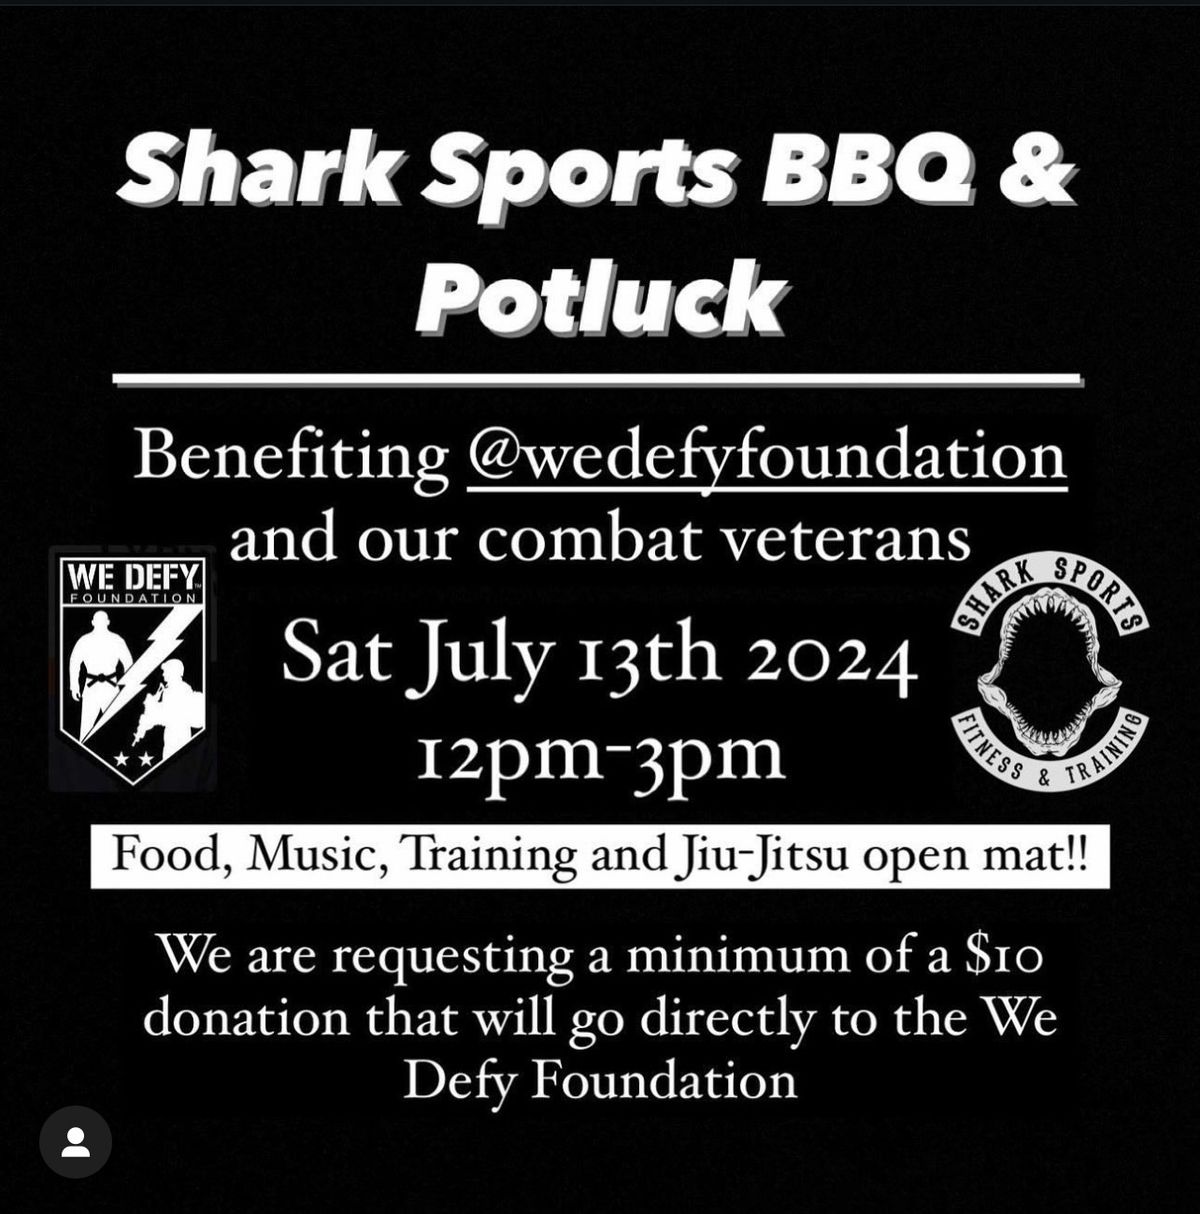 Shark Sports Open Gym and BBQ Potluck